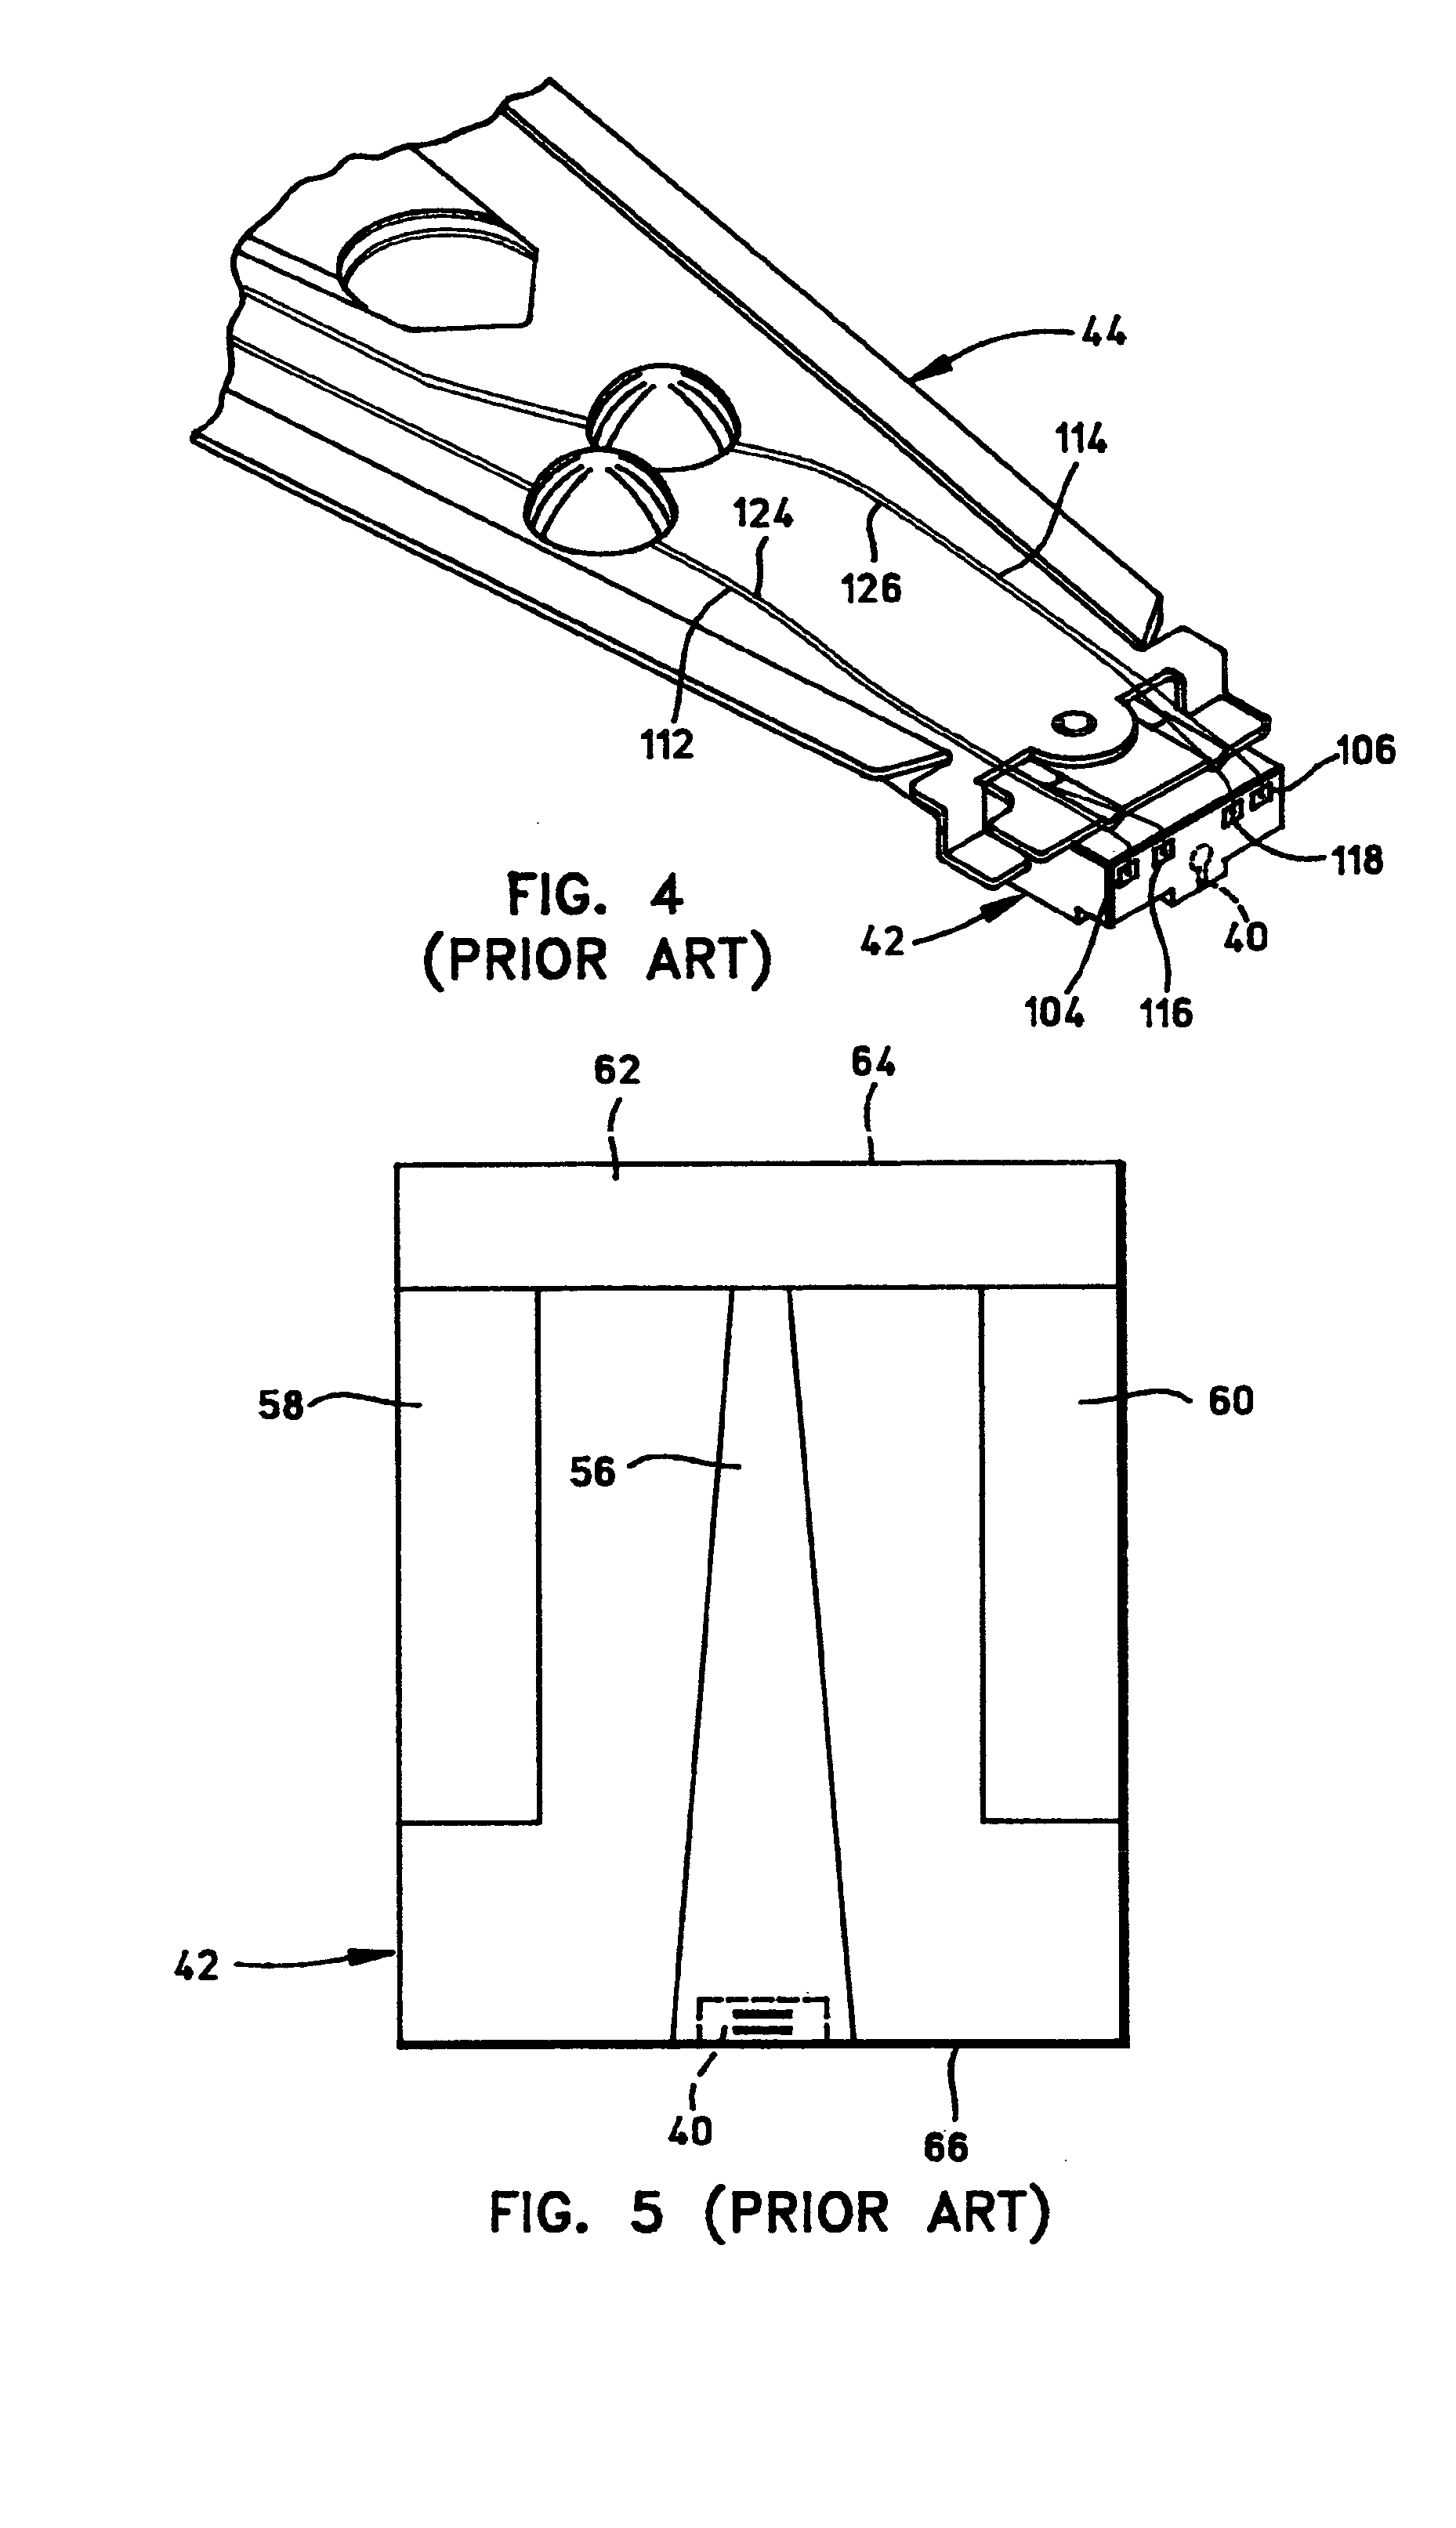 Spin valve sensor having an antiparallel (AP) self-pinned layer structure comprising cobalt for high magnetostriction